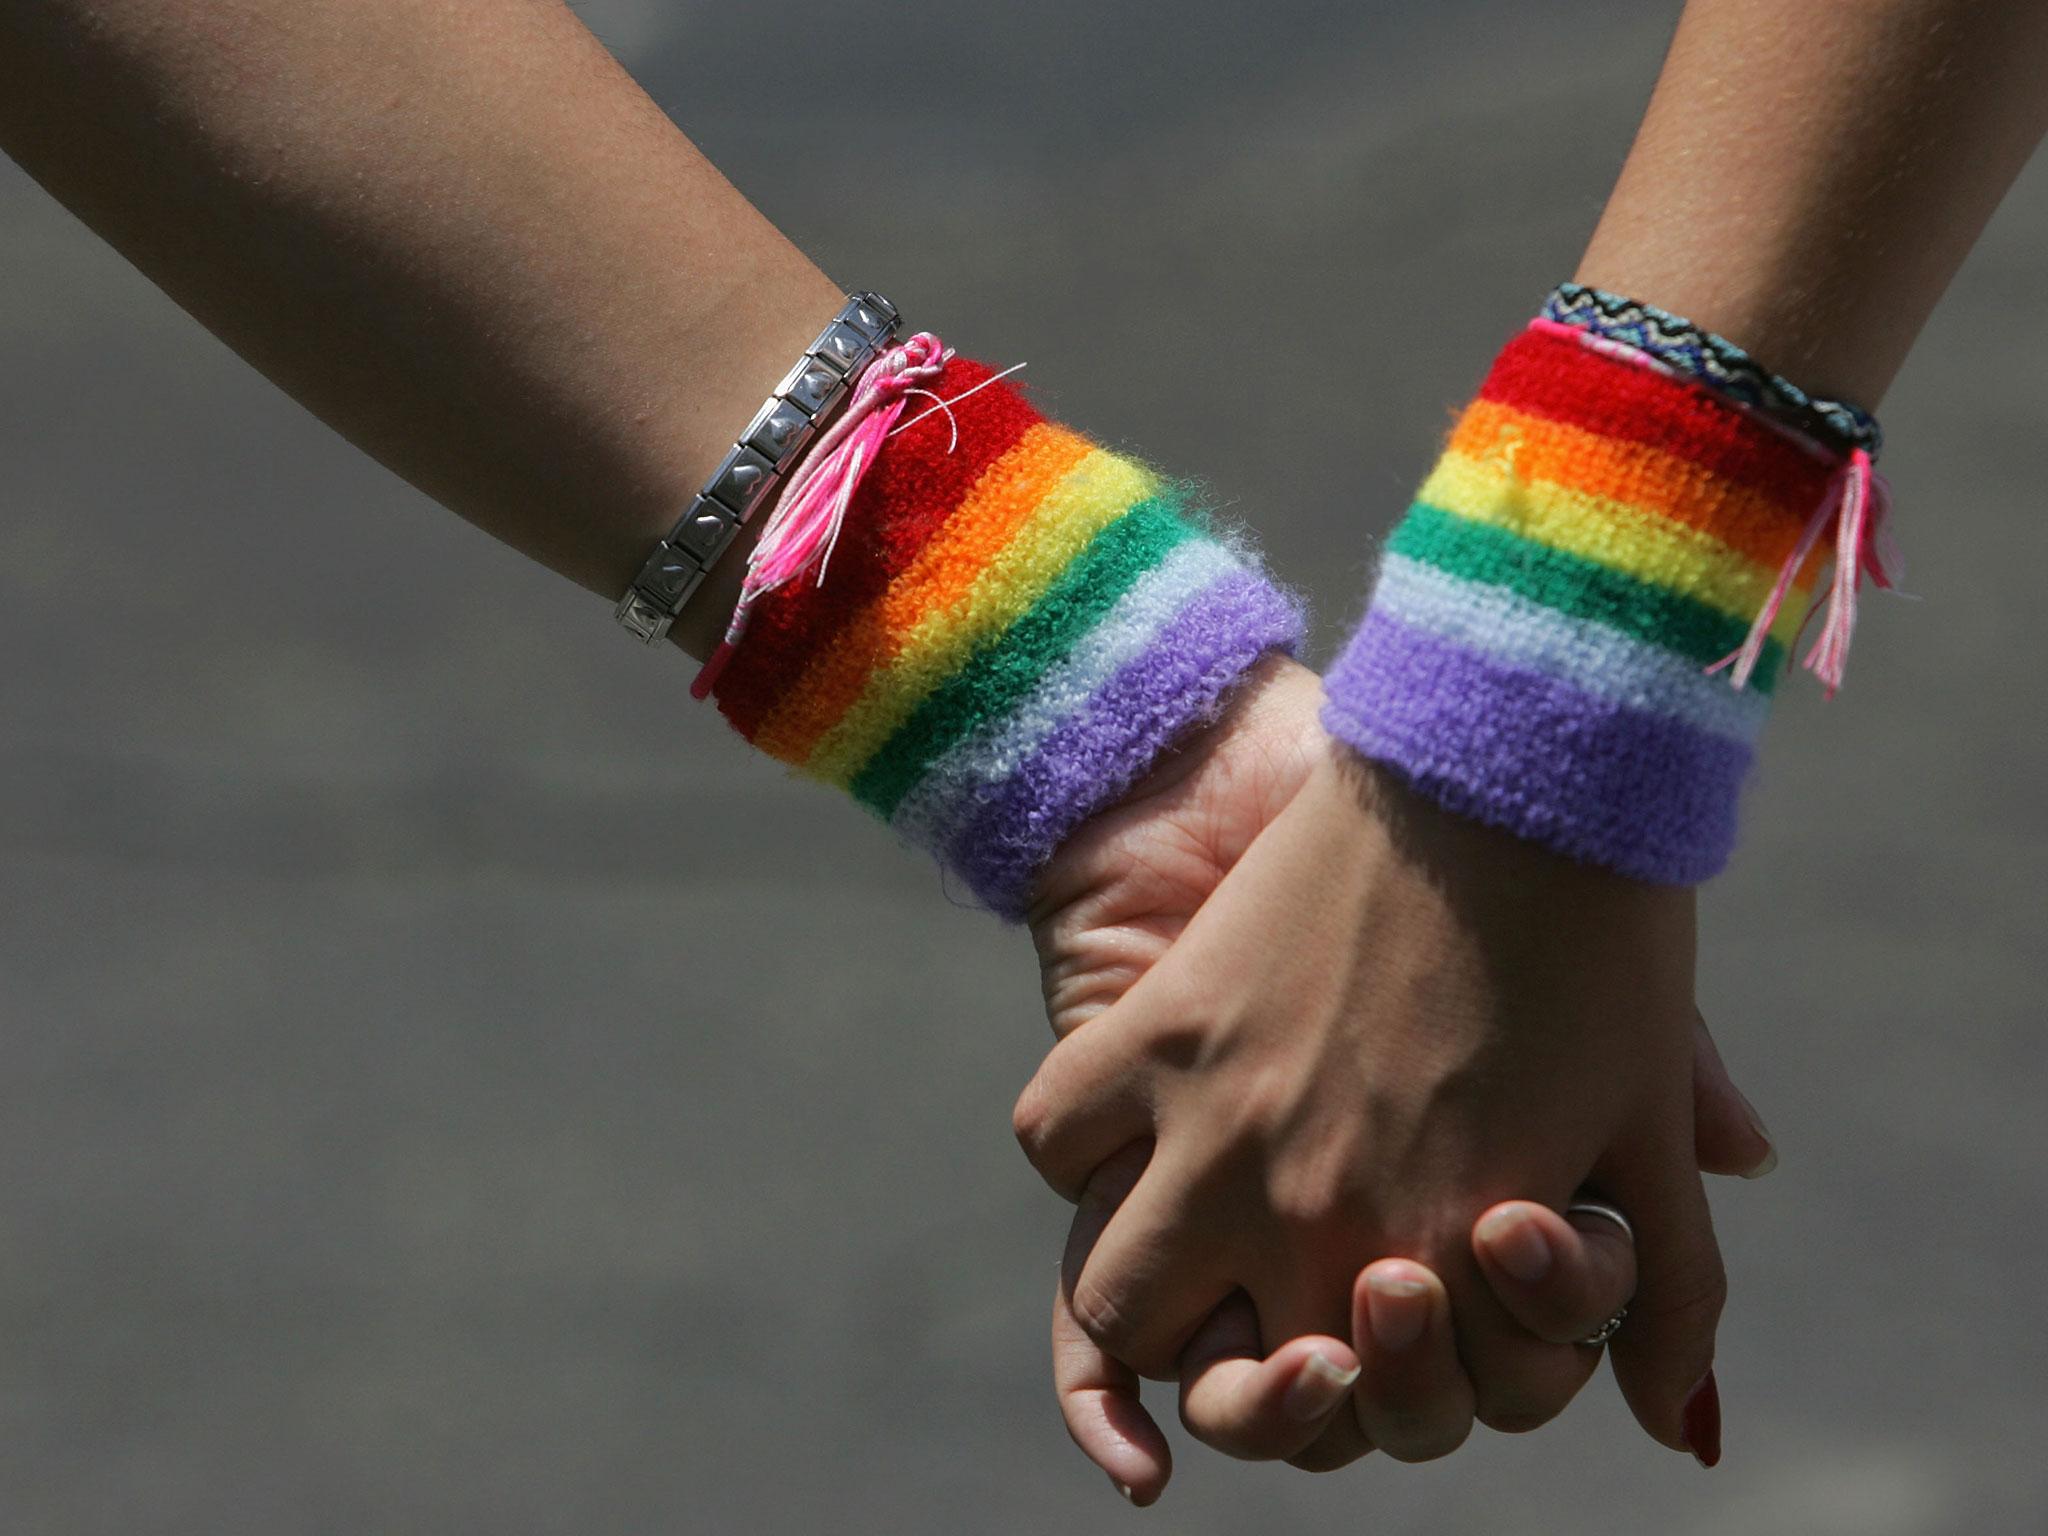 24 per cent of homeless young people identify as LGBT